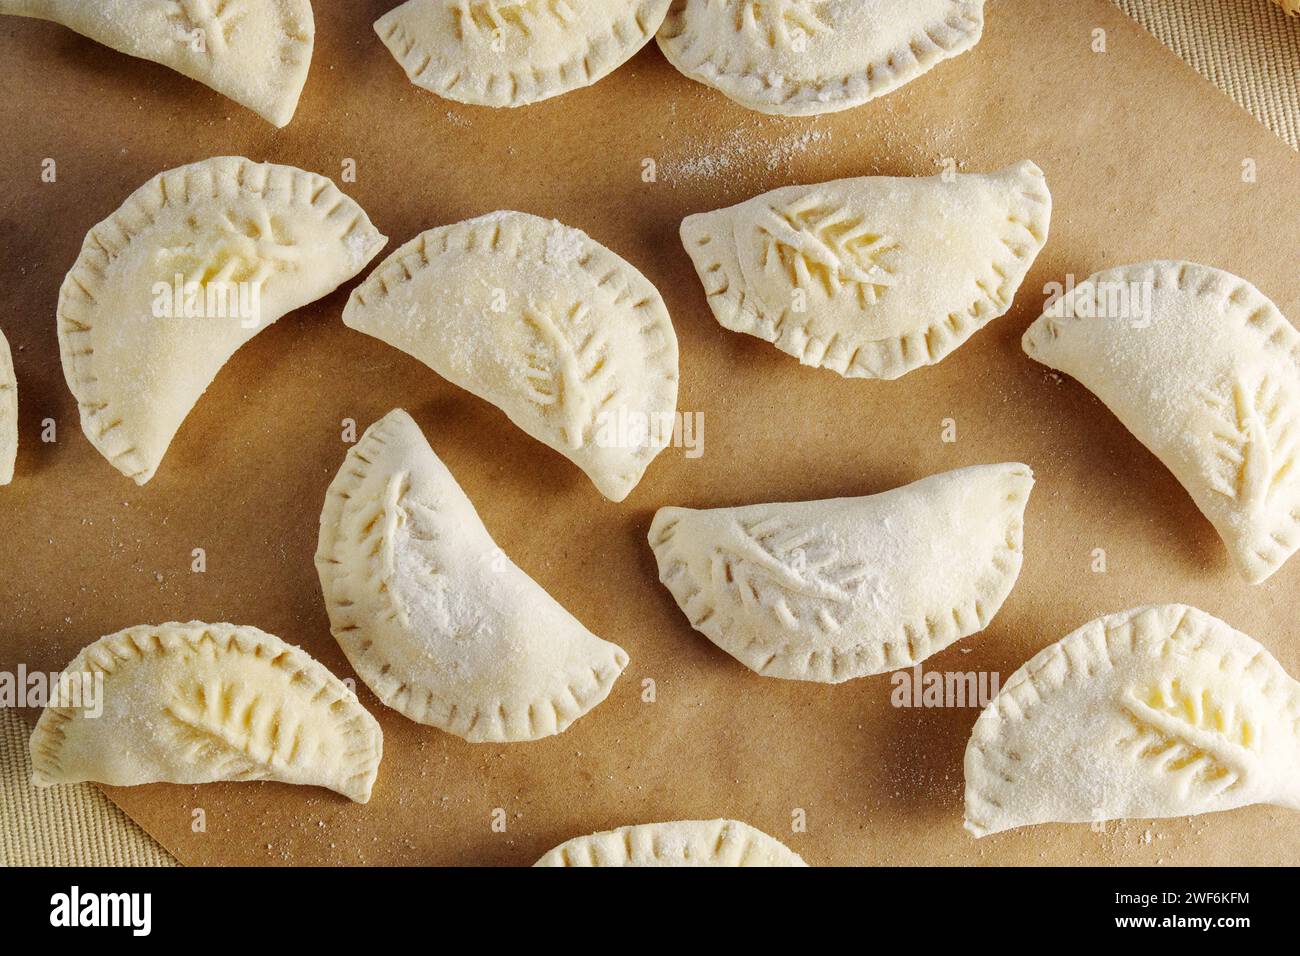 Variety of beautifully crafted dumplings artfully assembled on a wooden cutting board. Stock Photo